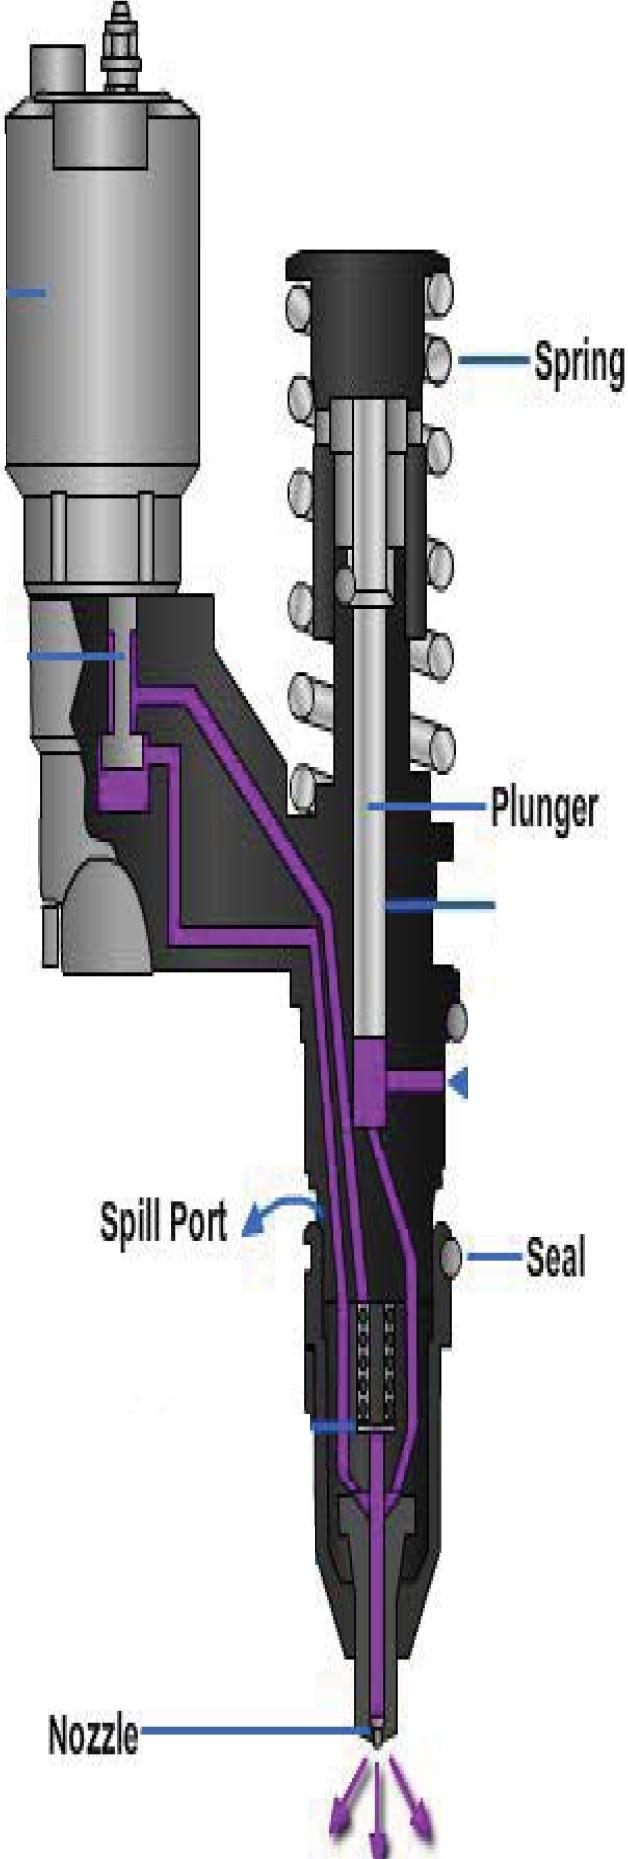 1 -Fill --Solenoid Connection (to the multiplex enable circuit} Soleno,id Valve Assembl.-- Valve (shown in _.